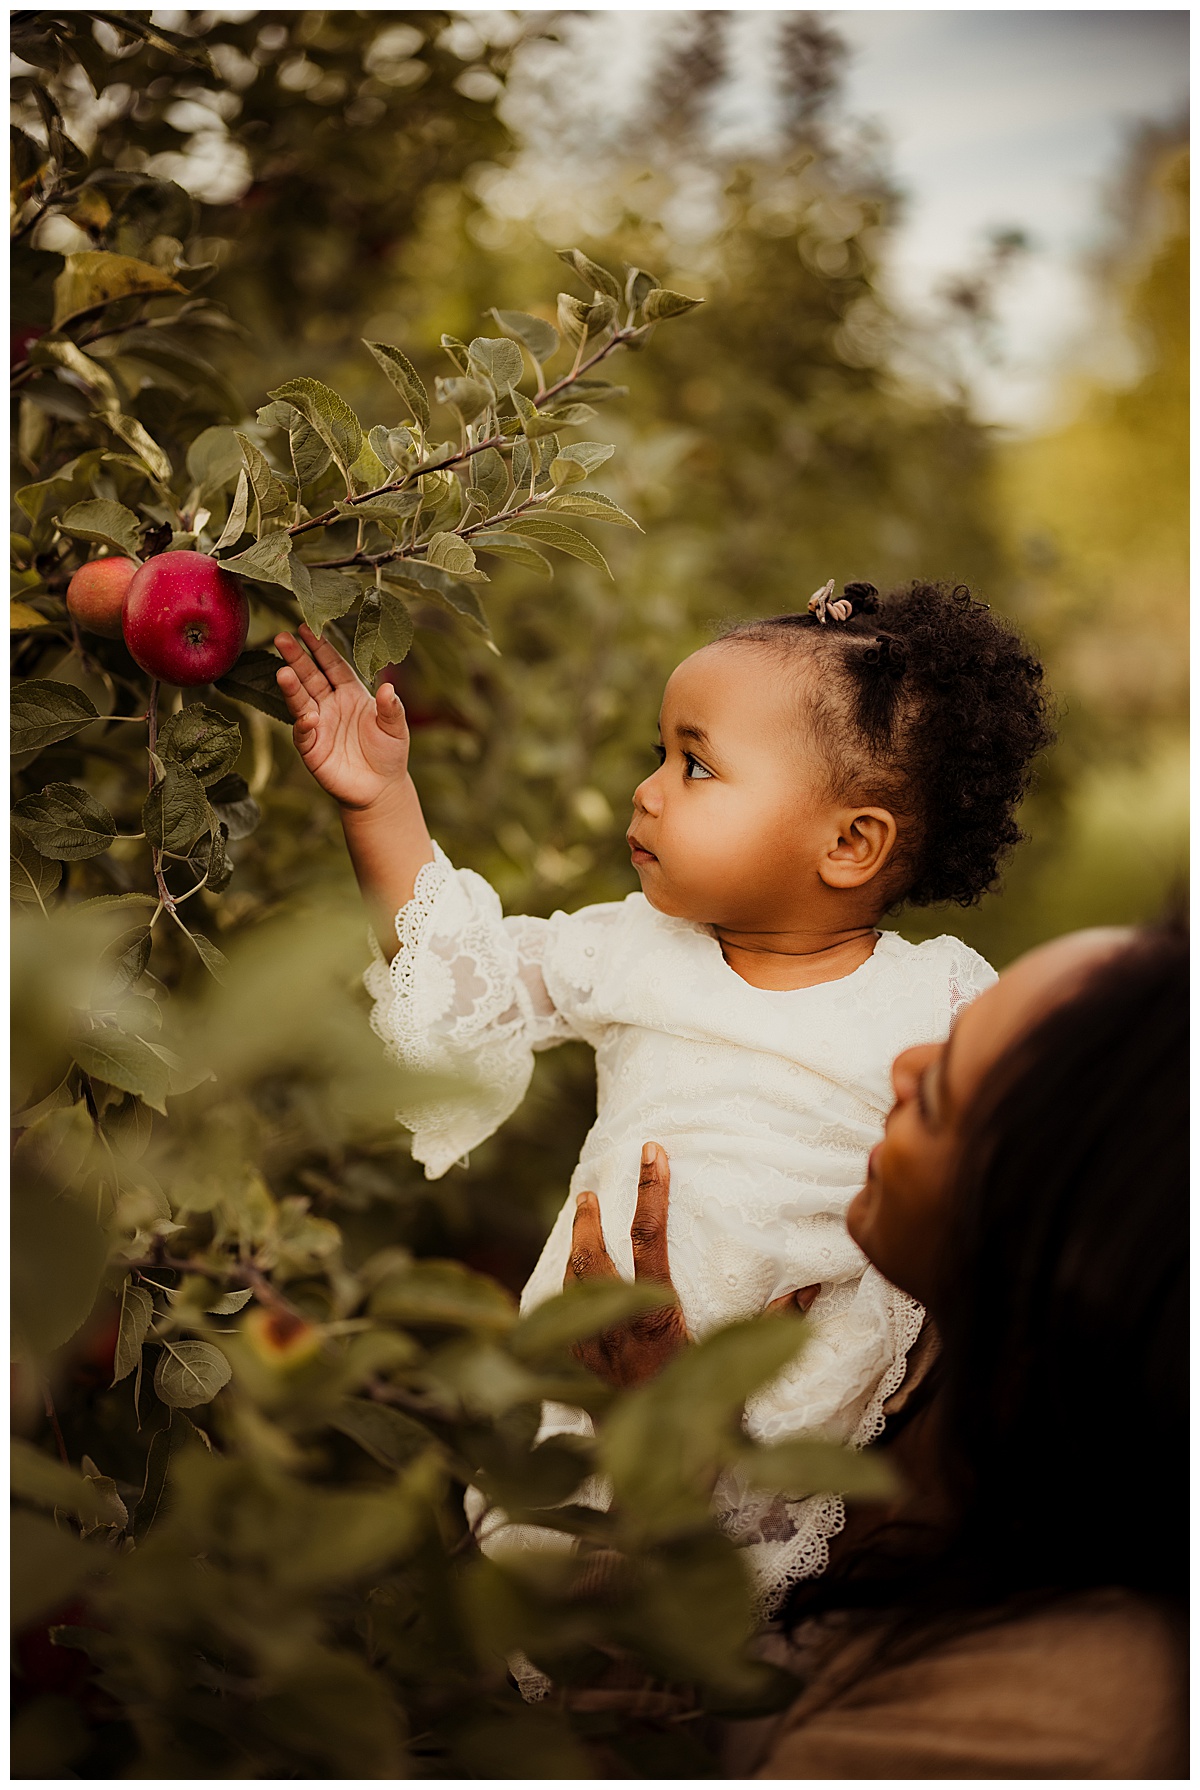 Little girl grabs an apple during their Outdoor Adventure Golden Hour Session at Great Country Farms